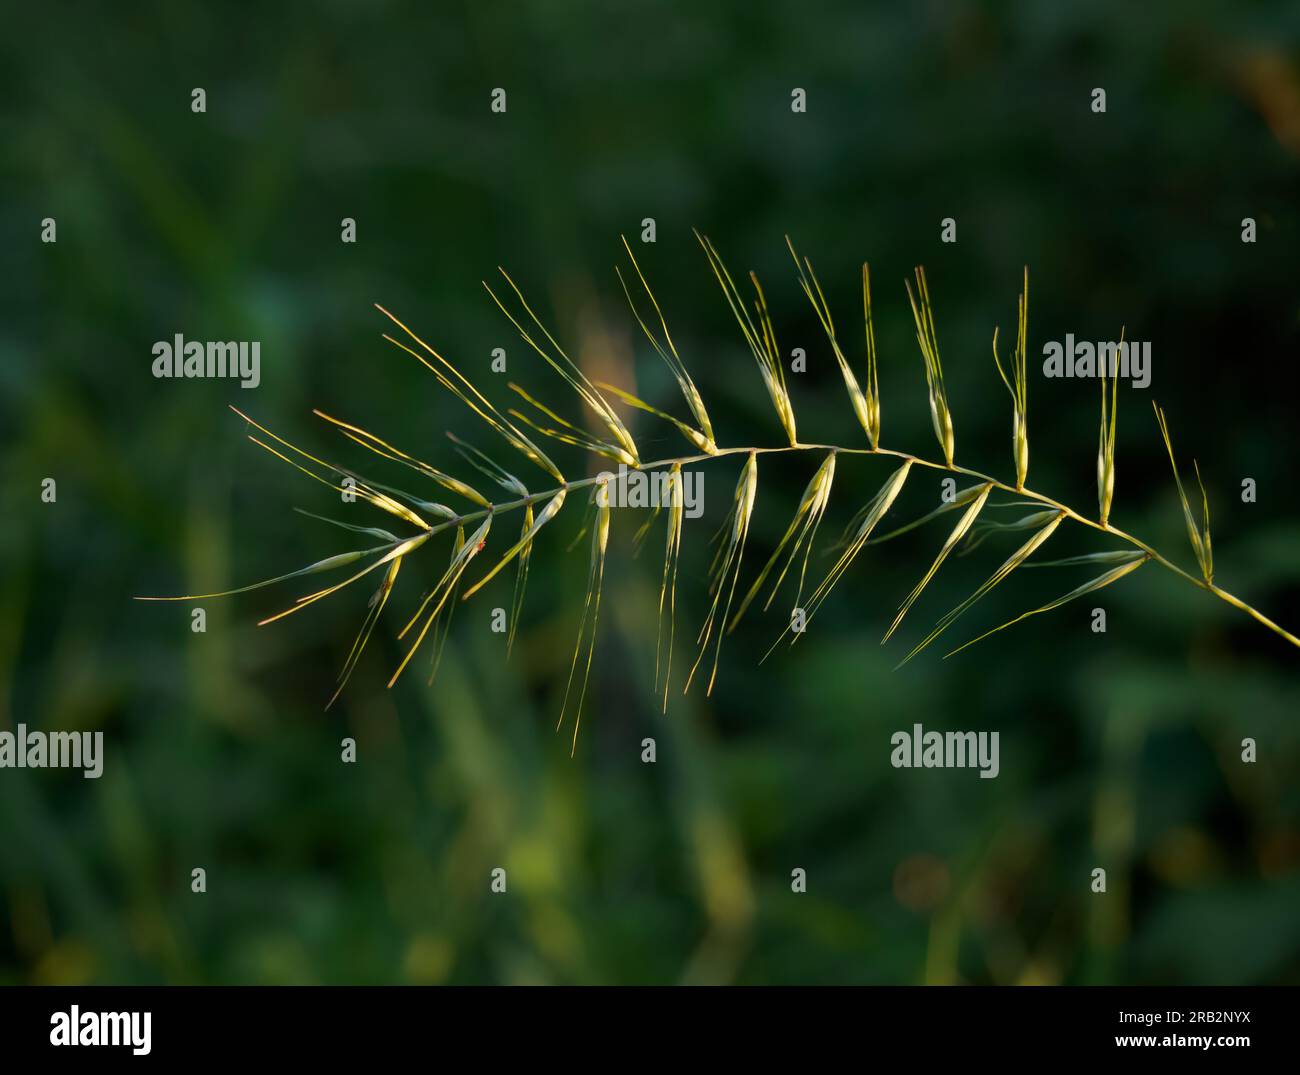 Sunlit golden stem of Eastern Bottlebrush Grass or Elymus hystrix photographed in Minnesota with a shallow depth of field. Stock Photo